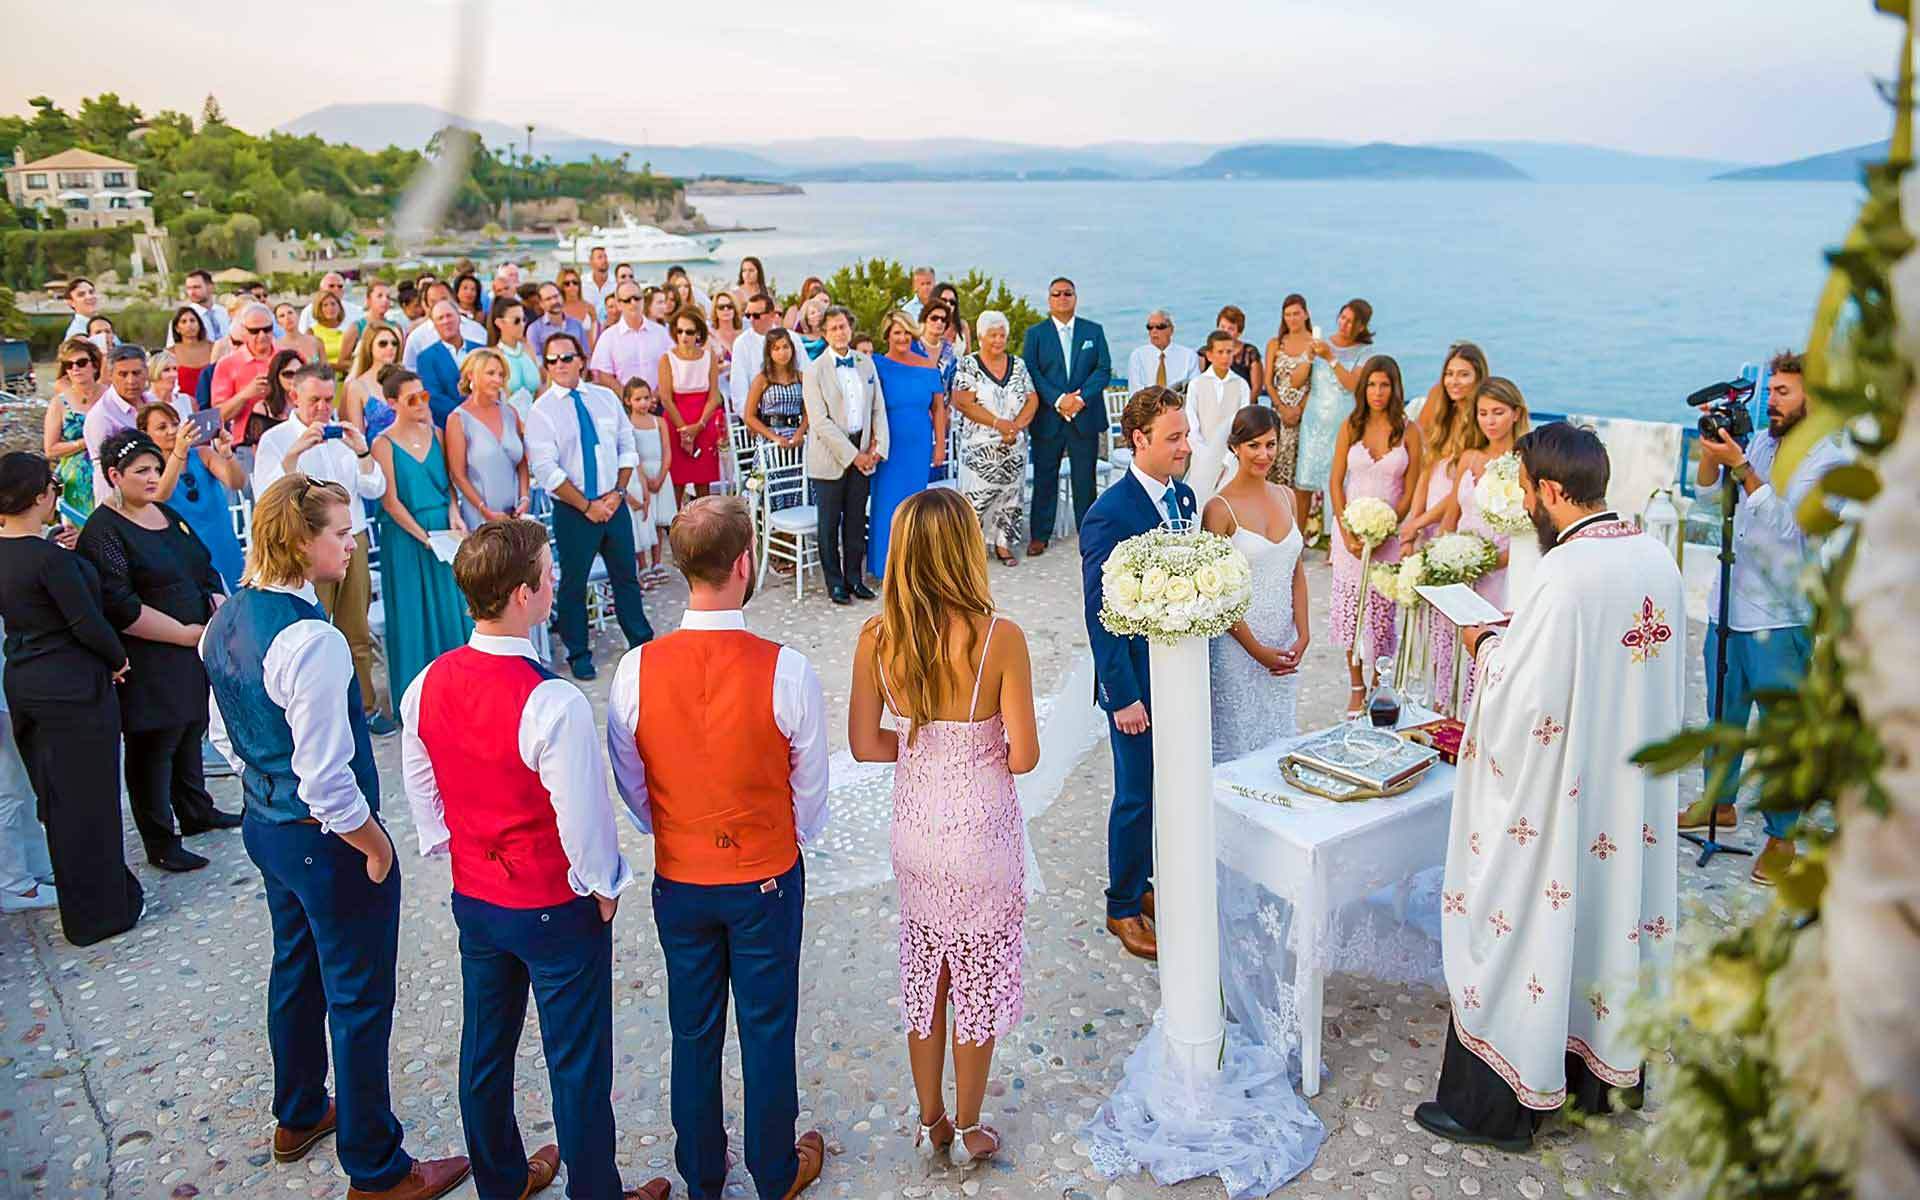 Wedding-ceremony-in-the-courtyard-of-a-monastery-on-a-Greek-island-by-Diamond-Events-Wedding